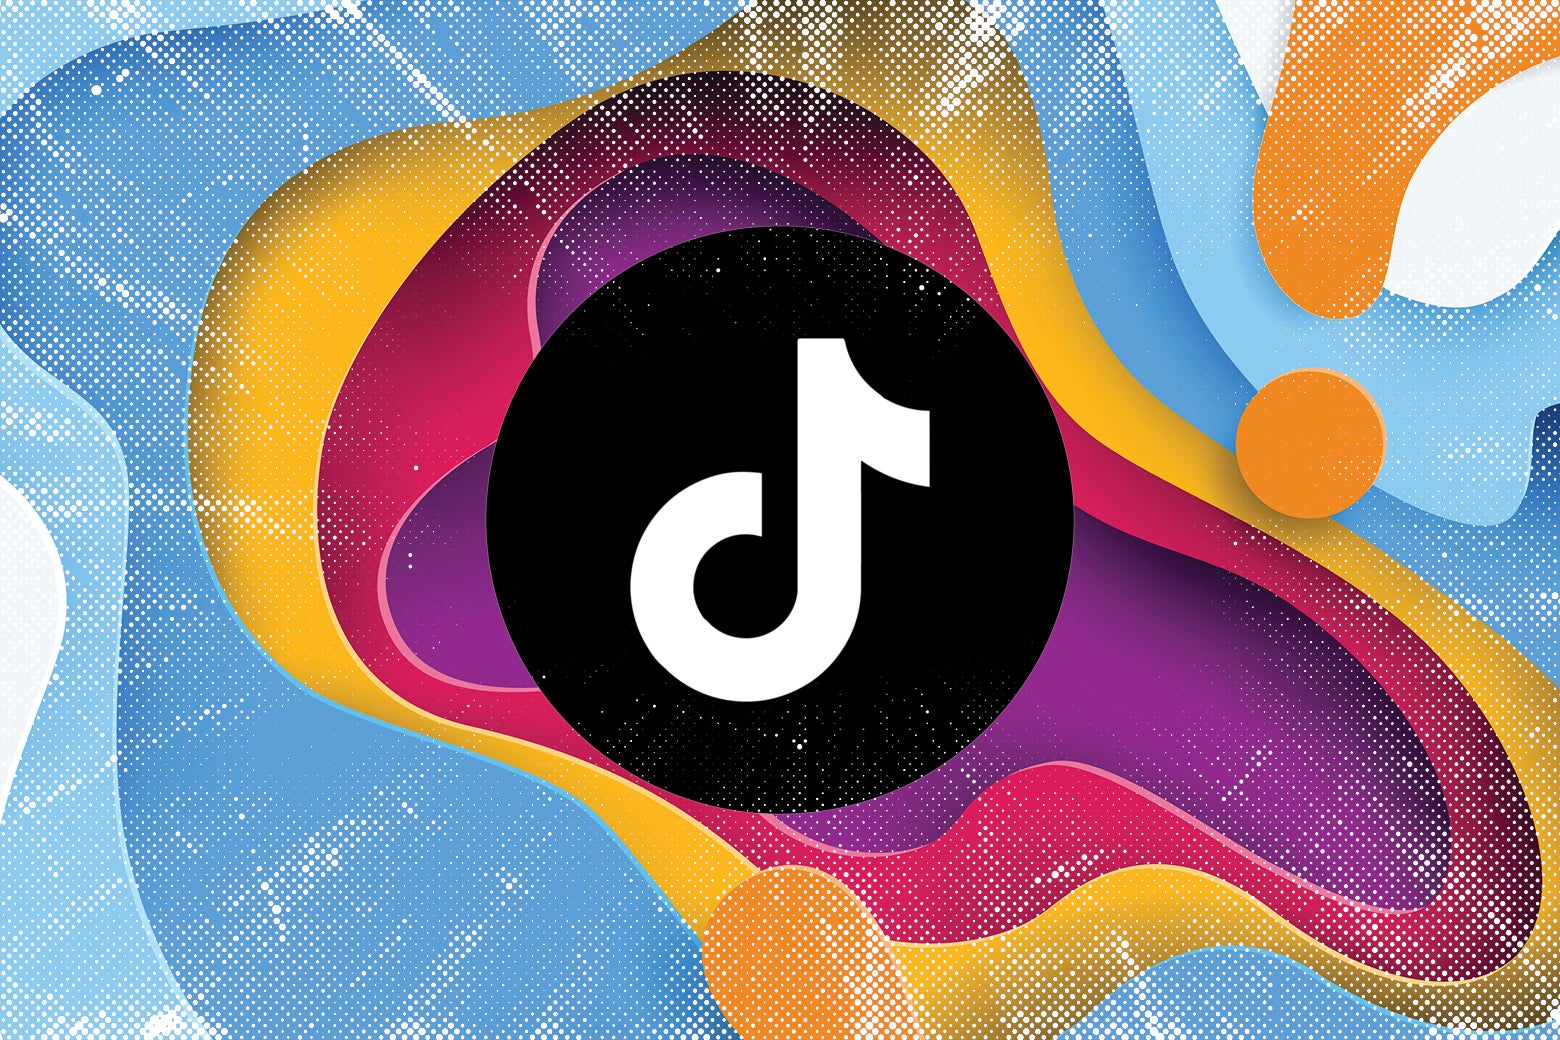 The TikTok logo surrounded by brightly colored swirls.